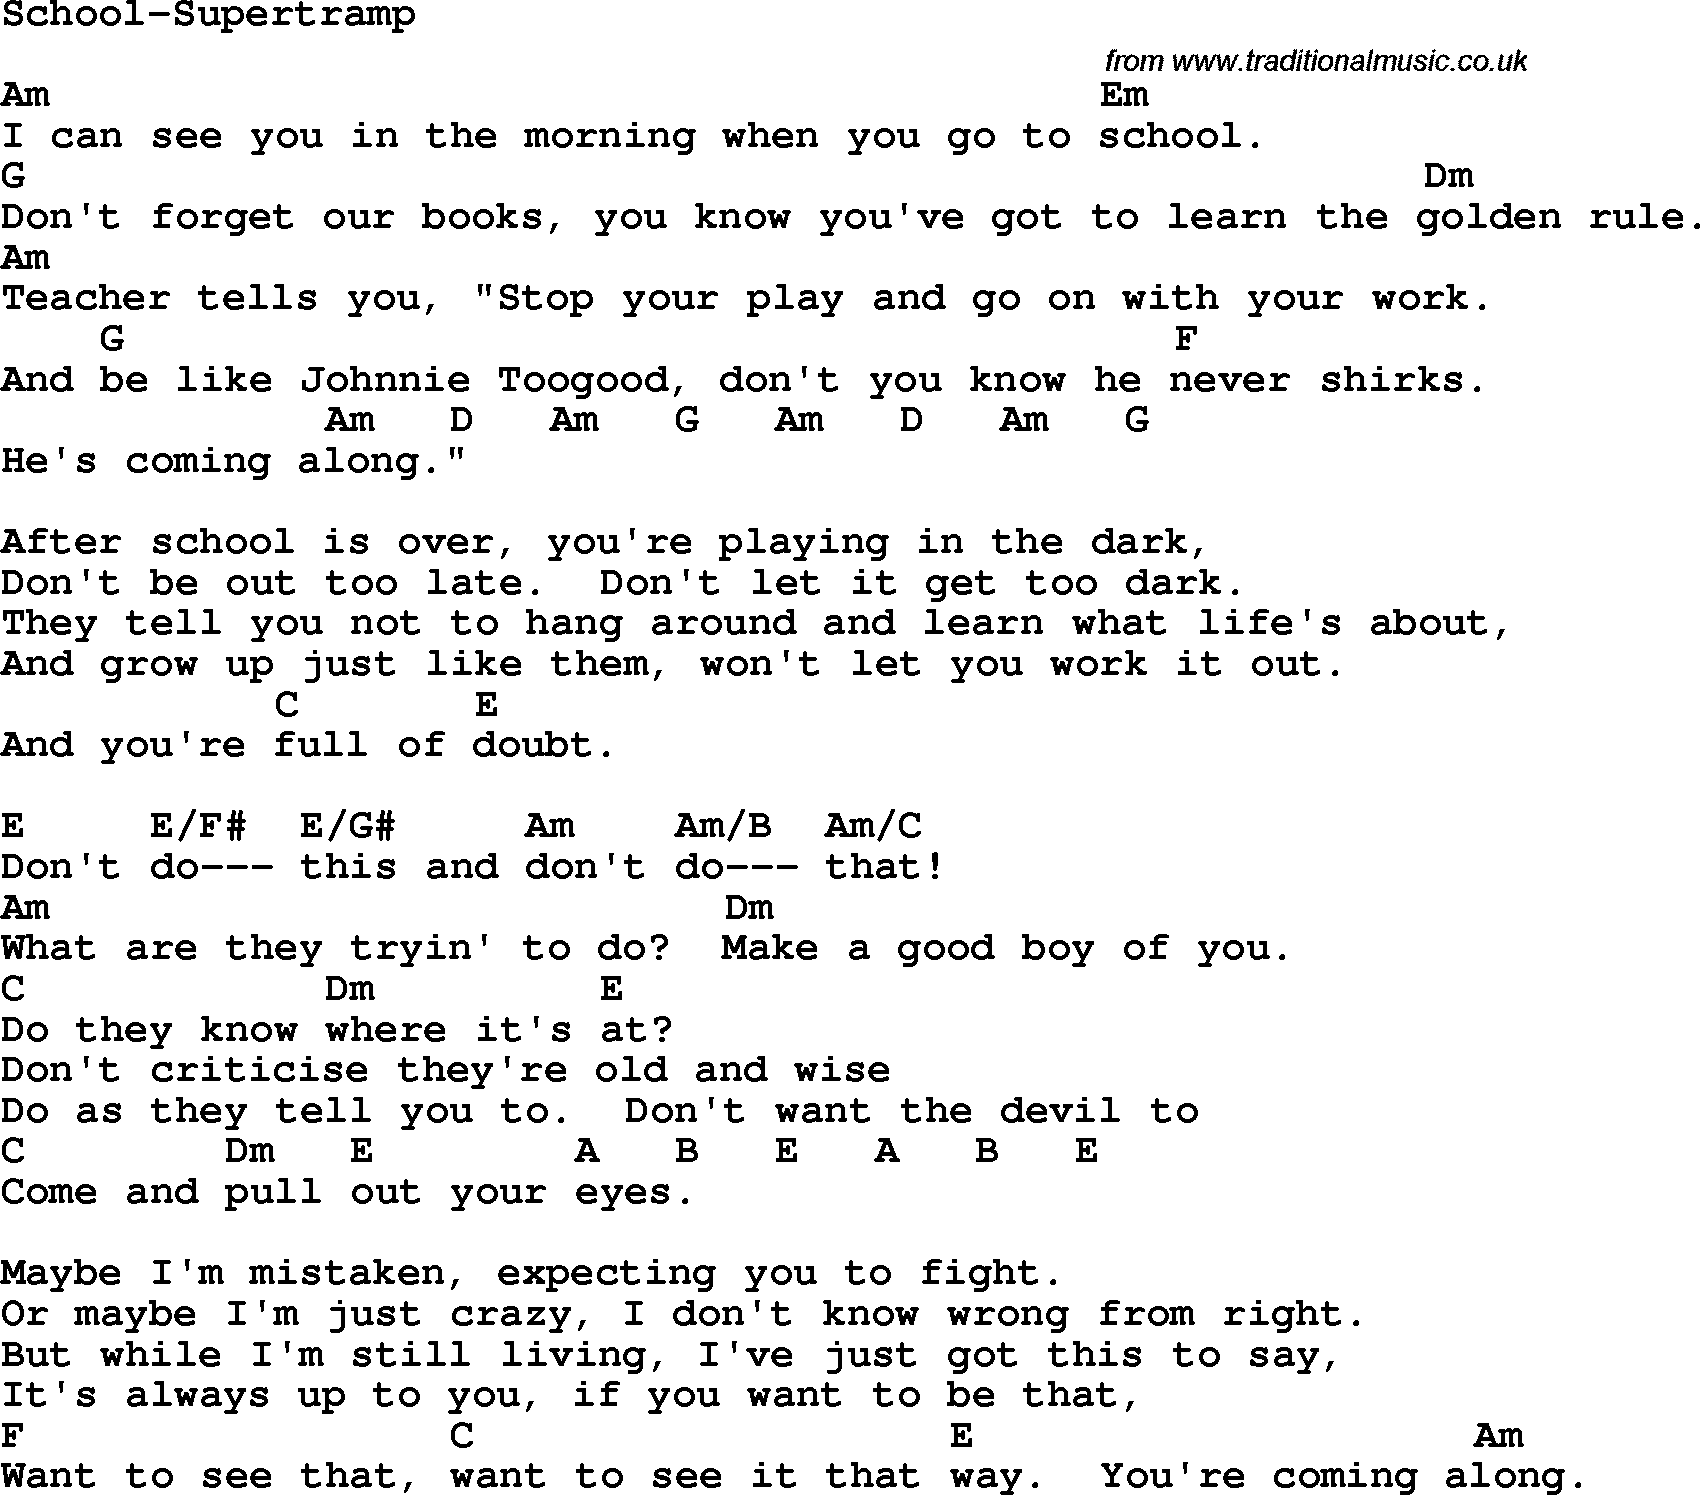 Protest Song School-Supertramp lyrics and chords